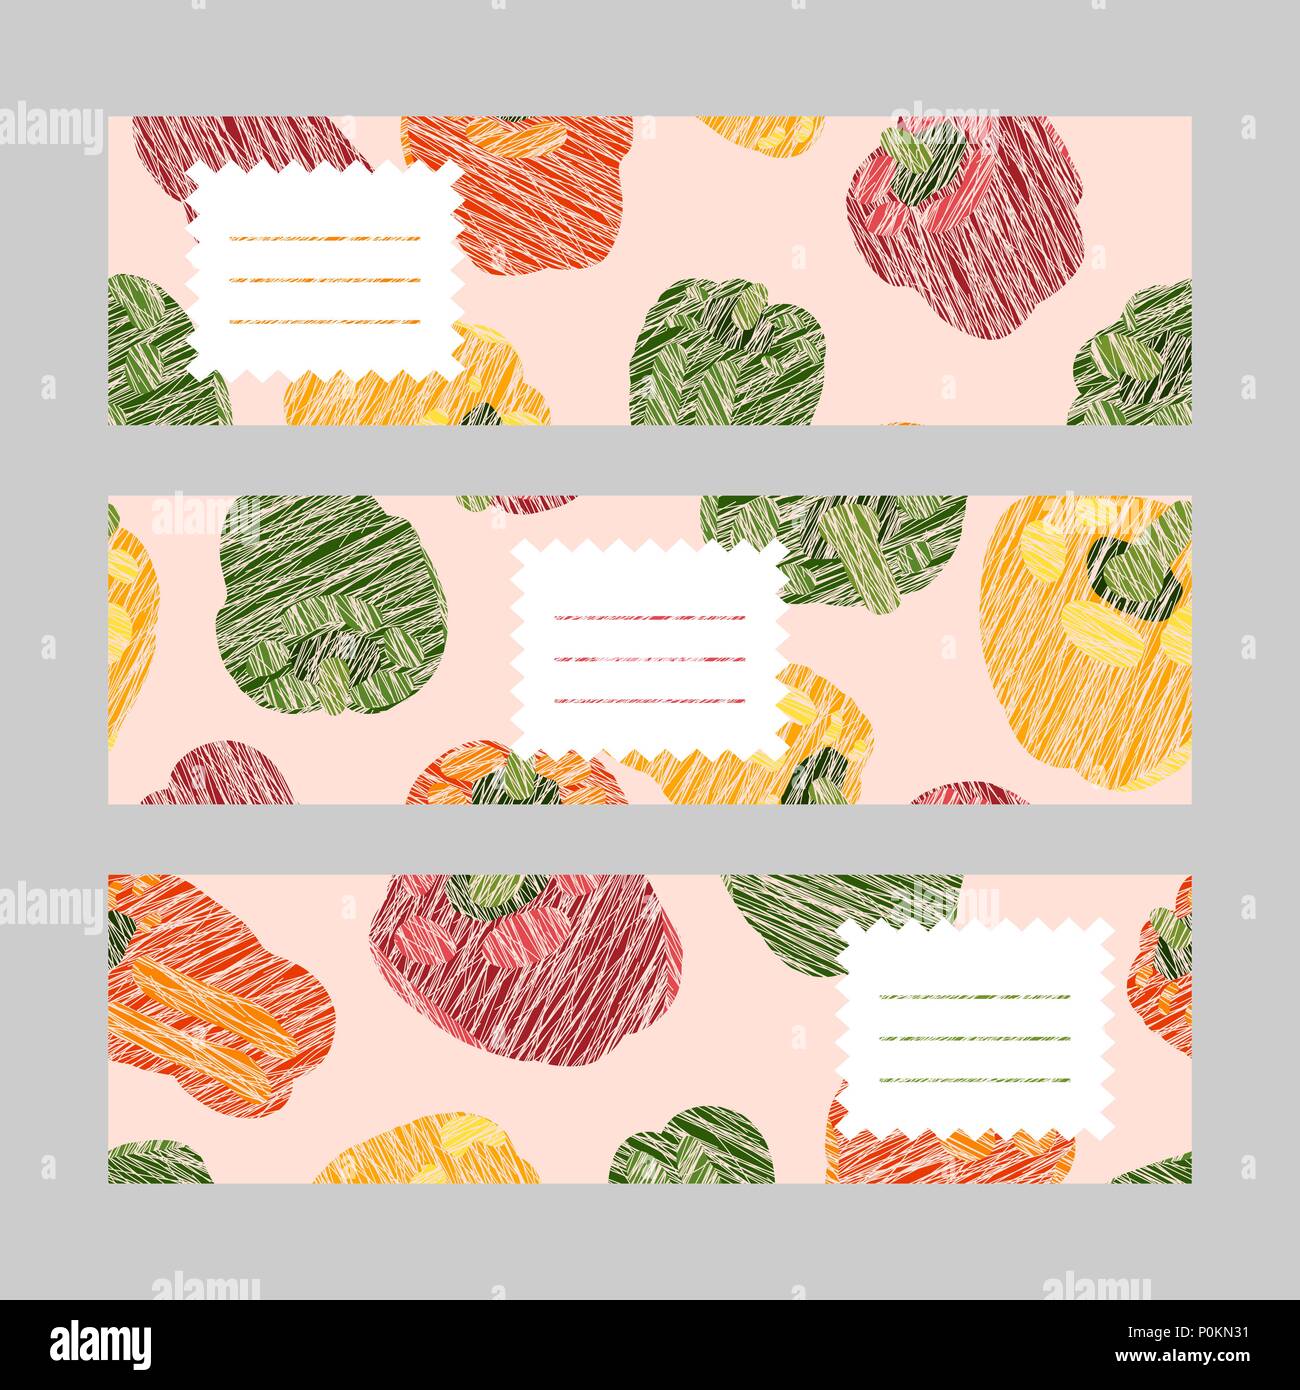 Banner set. Colorful sweet peppers. Horizontal series. Scratched vegetables. Text frame. Copy space. Hand drawn vegetable pattern. Vegetarian flyer co Stock Vector